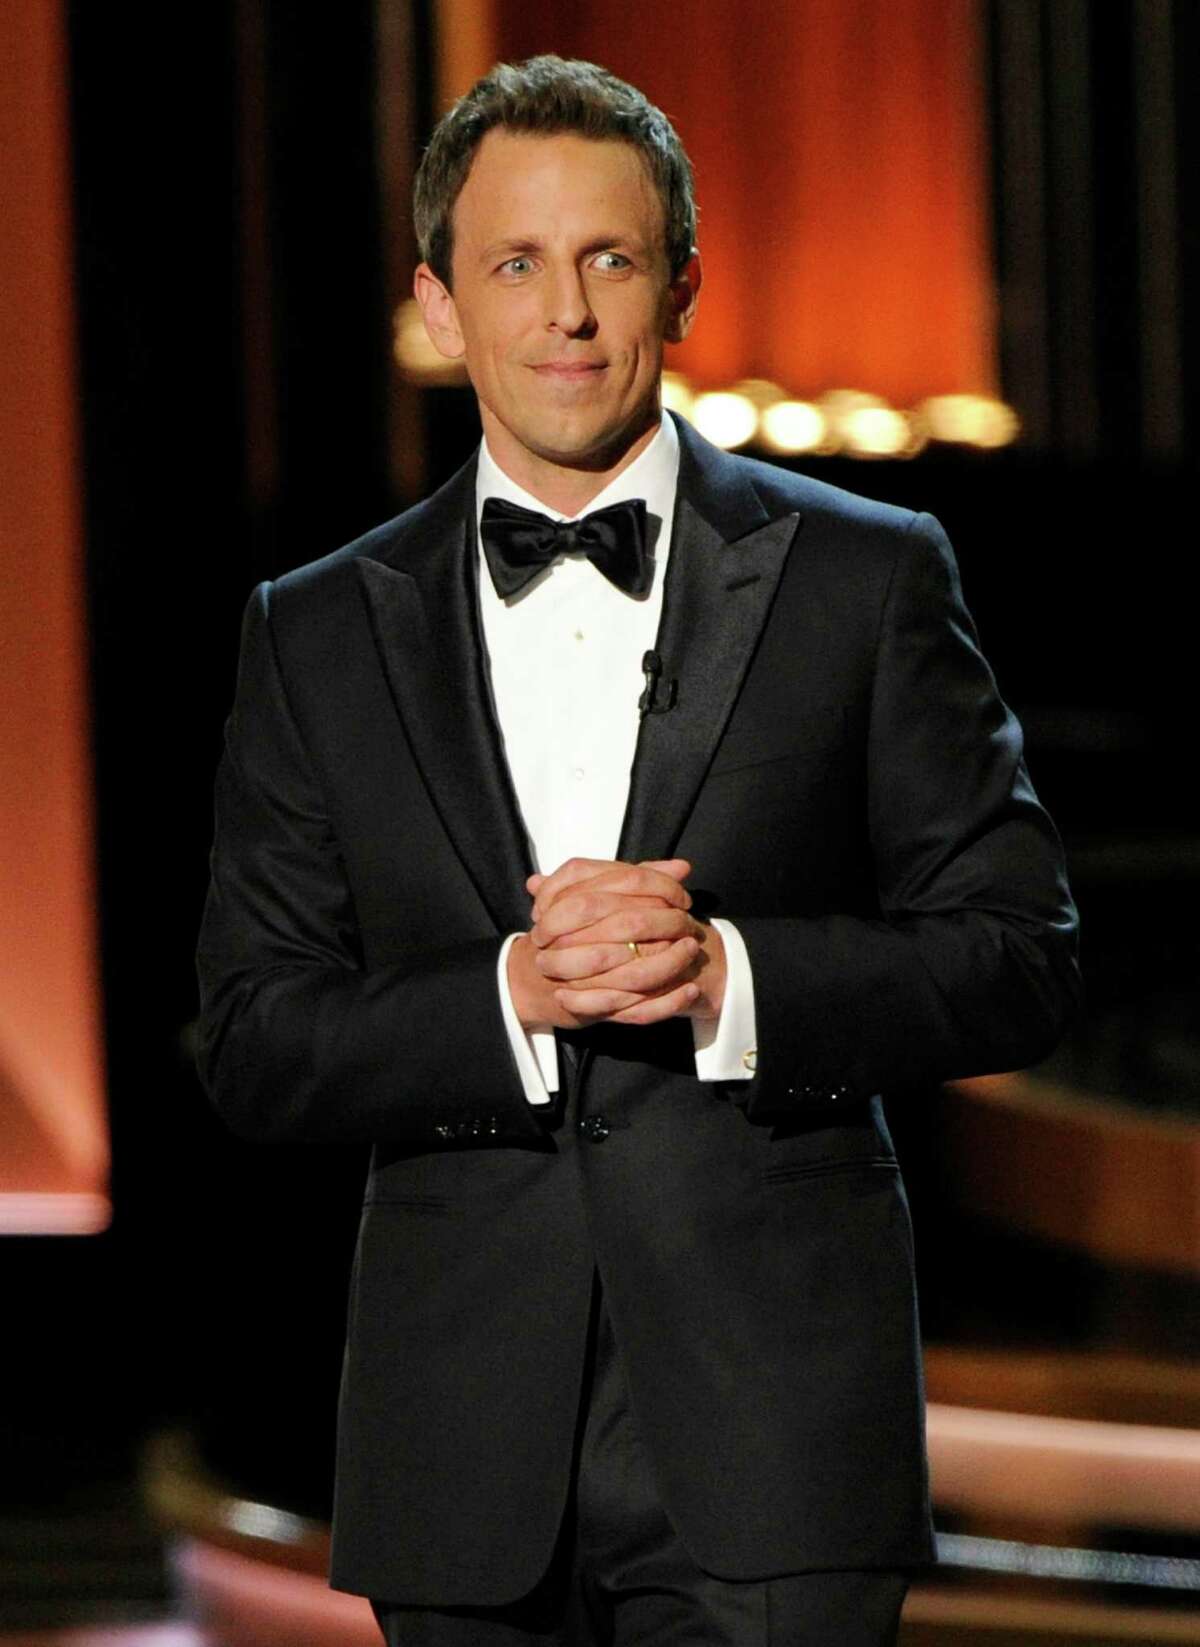 Host Seth Meyers speaks on stage at the 66th Annual Primetime Emmy Awards at the Nokia Theatre L.A. Live on Monday, Aug. 25, 2014, in Los Angeles. (Photo by Chris Pizzello/Invision/AP)